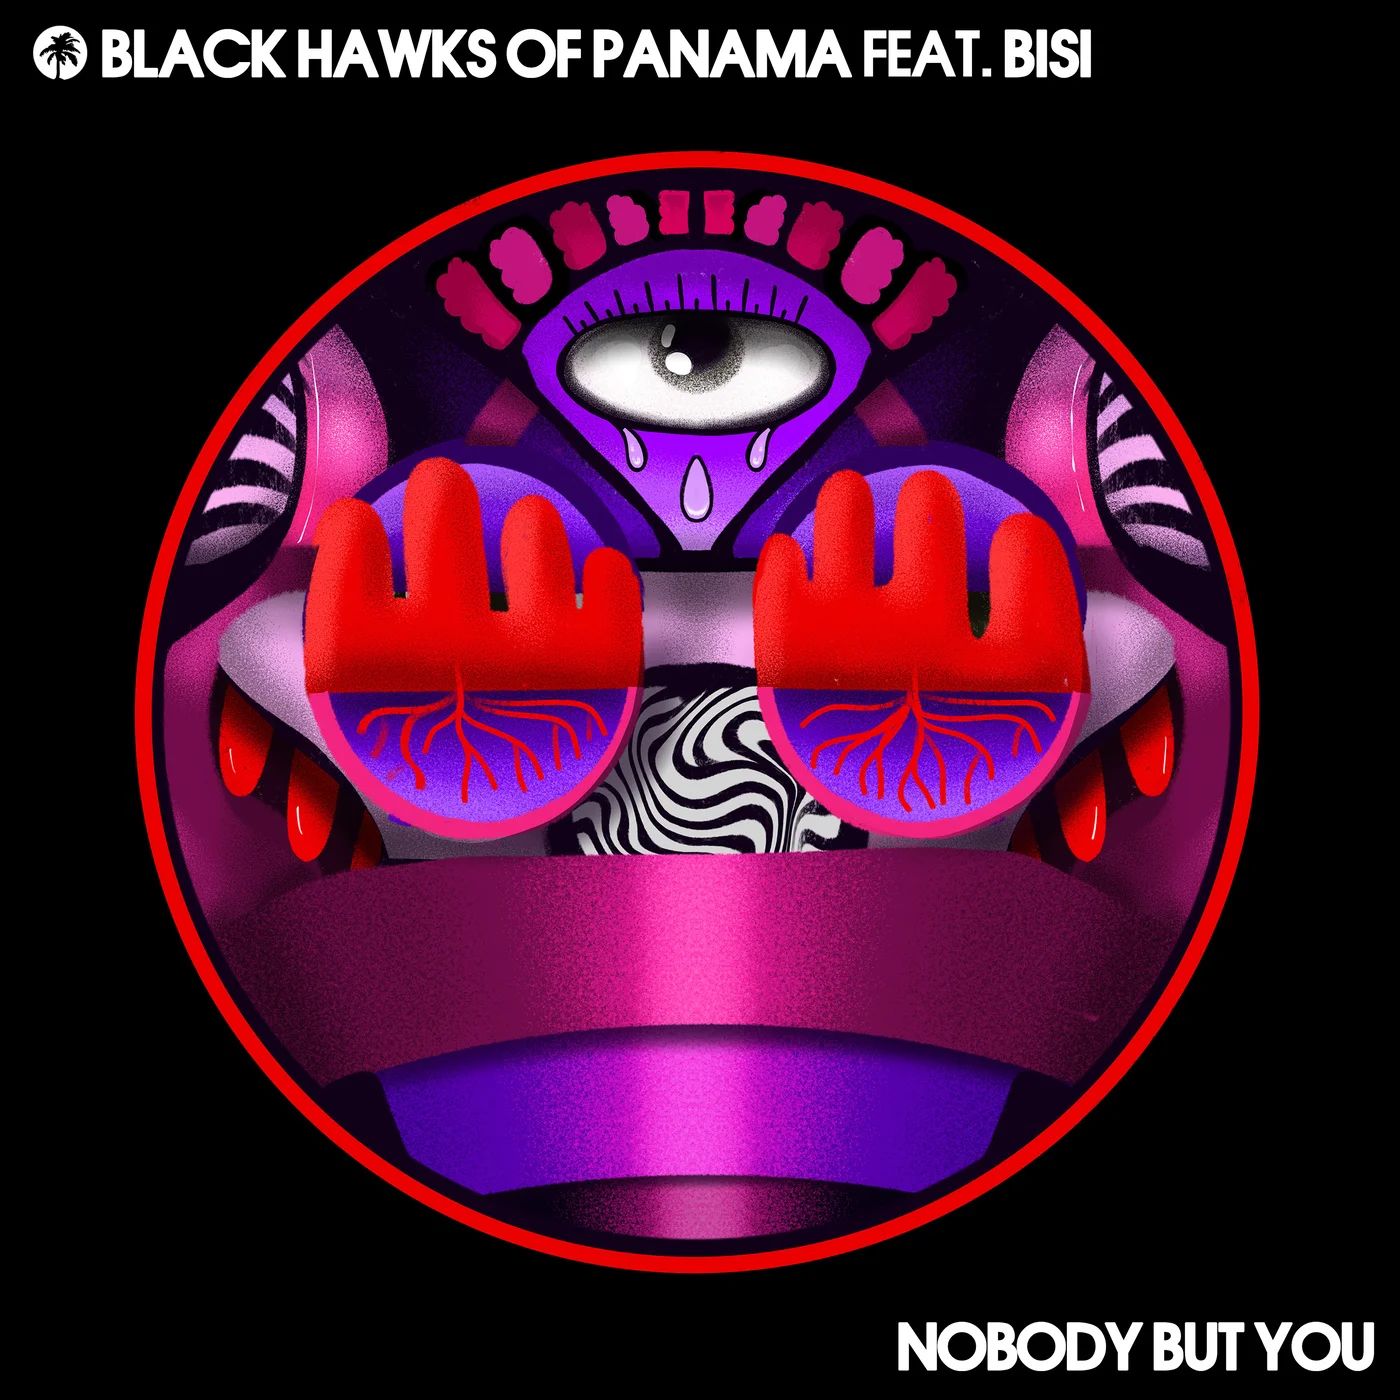 Black Hawks of Panama - Nobody But You feat. Bisi (Sidney Charles Remix)